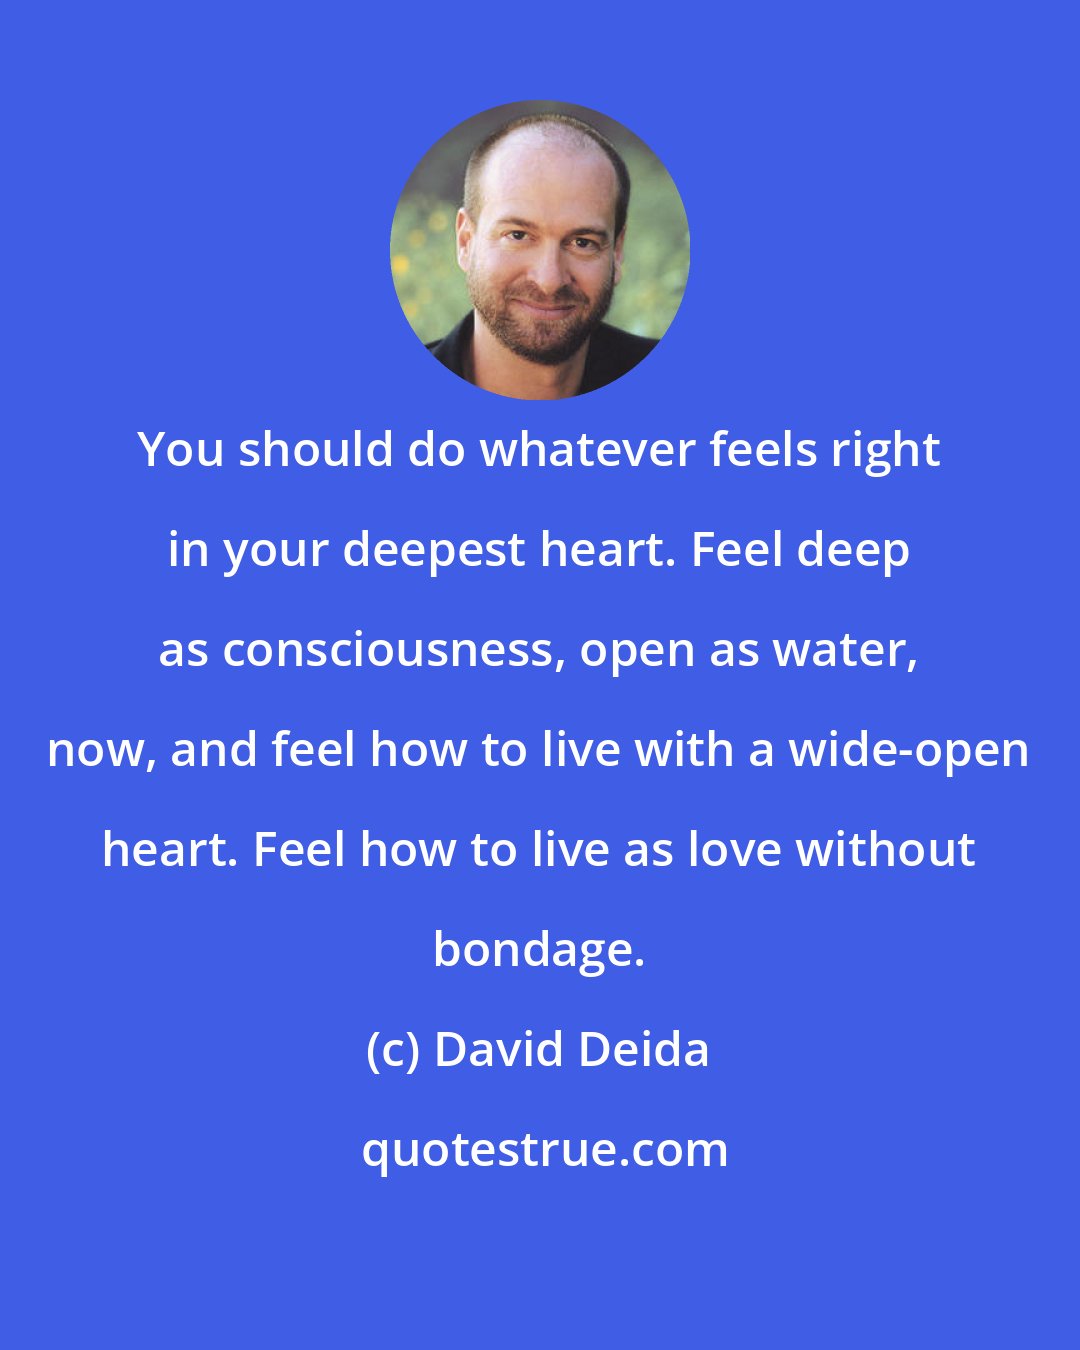 David Deida: You should do whatever feels right in your deepest heart. Feel deep as consciousness, open as water, now, and feel how to live with a wide-open heart. Feel how to live as love without bondage.